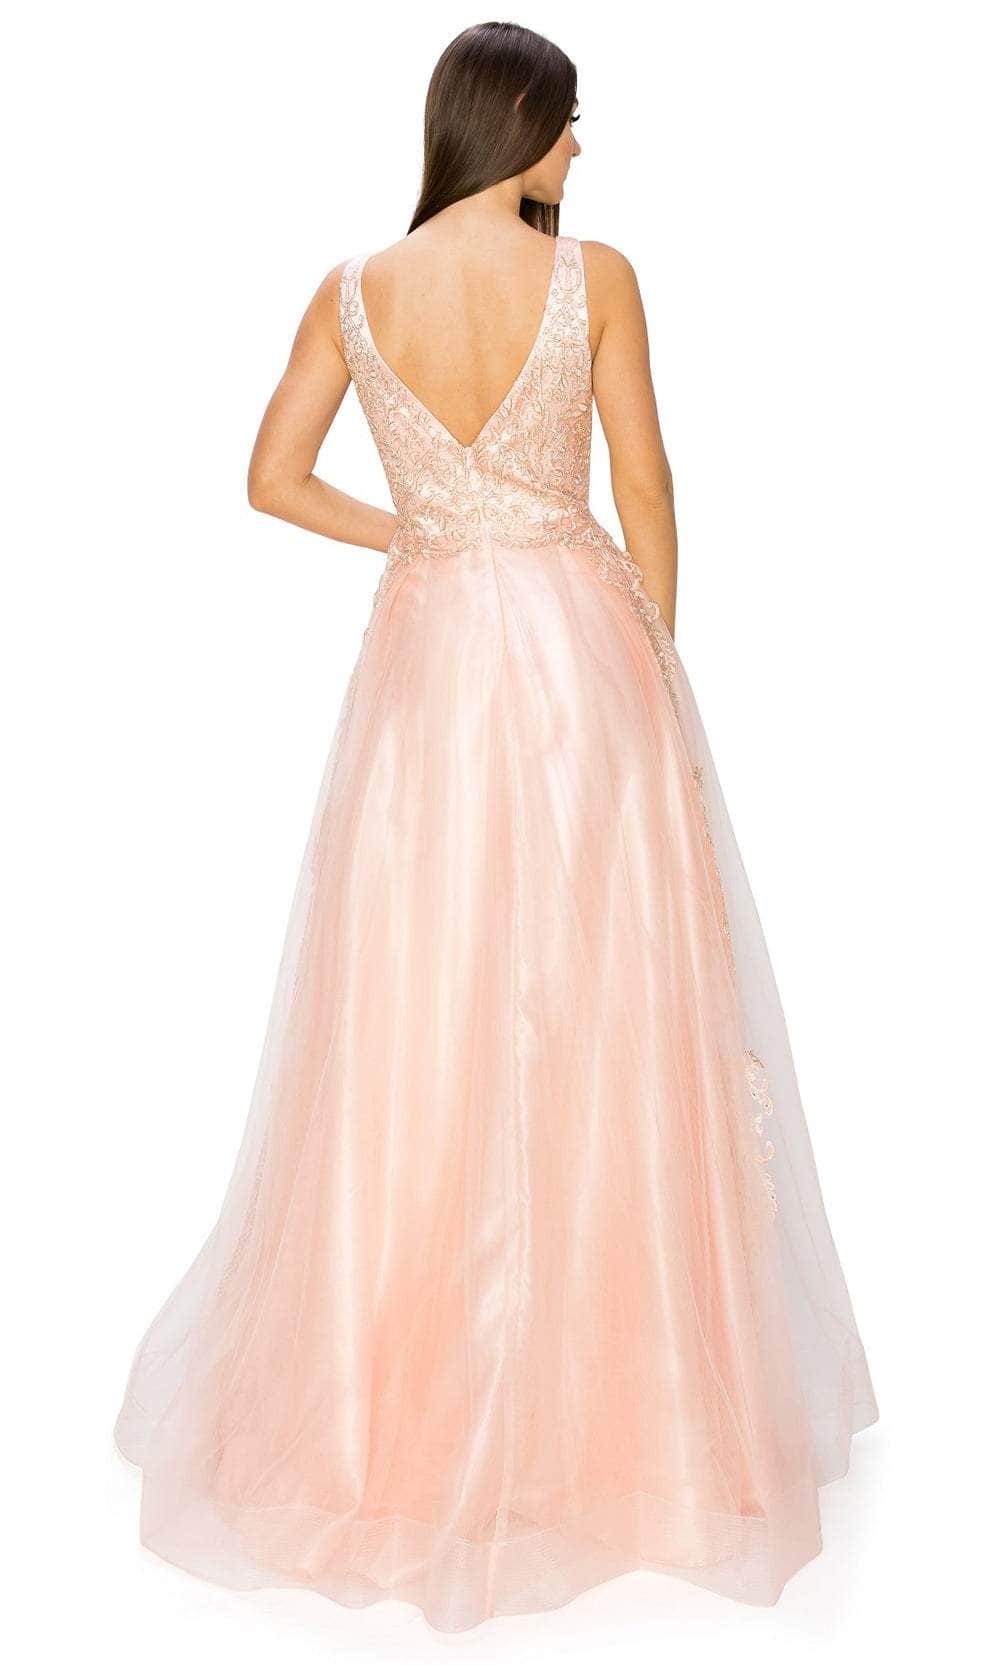 Cinderella Couture 8029J - Plunging V-Neck Tulle Prom Gown Special Occasion Dress